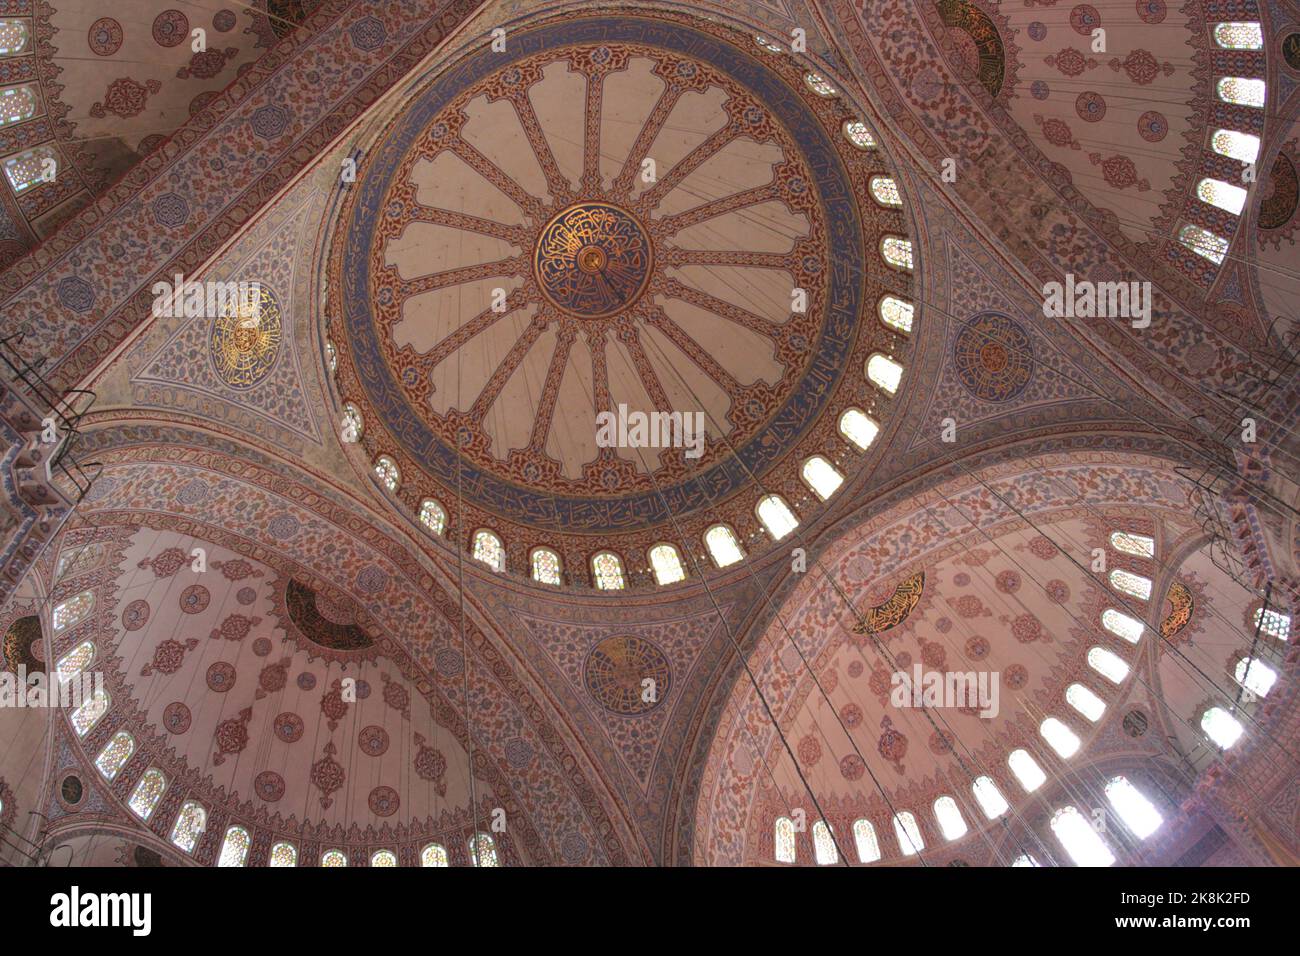 Ceiling of the Ottoman era Blue Mosque, Sultan Ahmed Mosque, Sultan Ahmed Camii, Istanbul,  Turkey Stock Photo